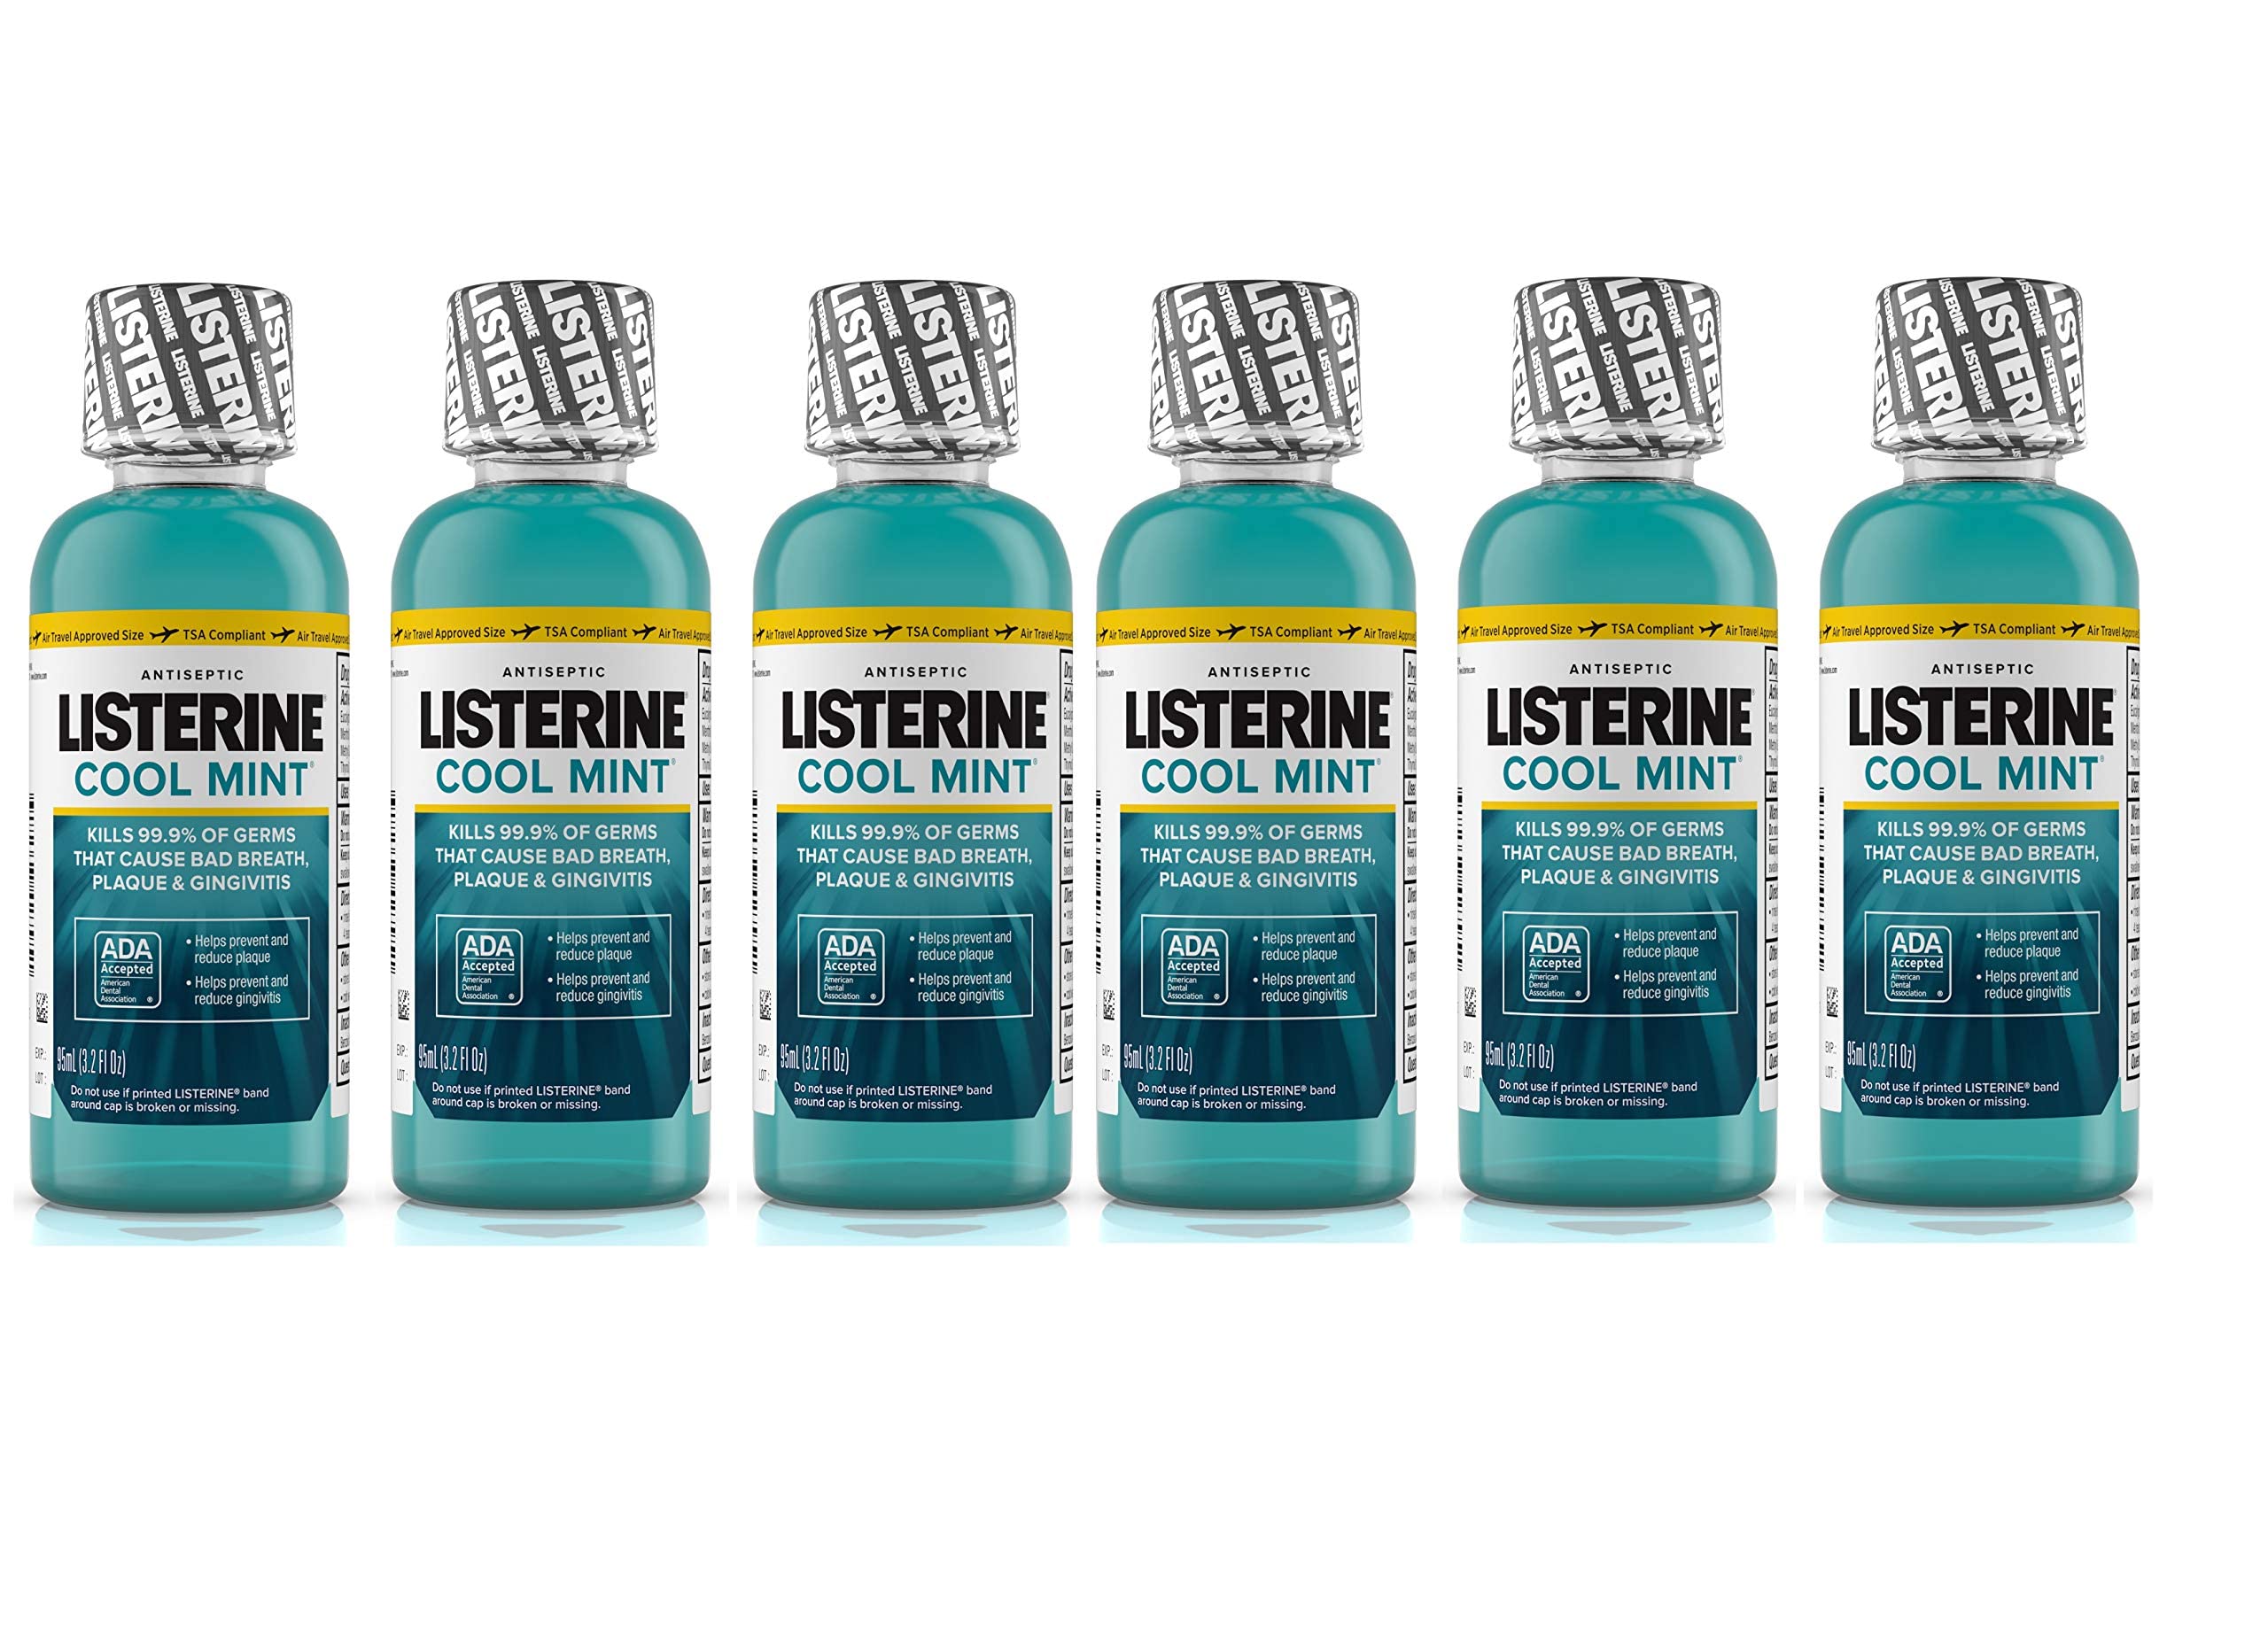 Listerine Cool Mint Antiseptic Mouthwash for Bad Breath, Travel Size 3.2 oz - Pack of 6